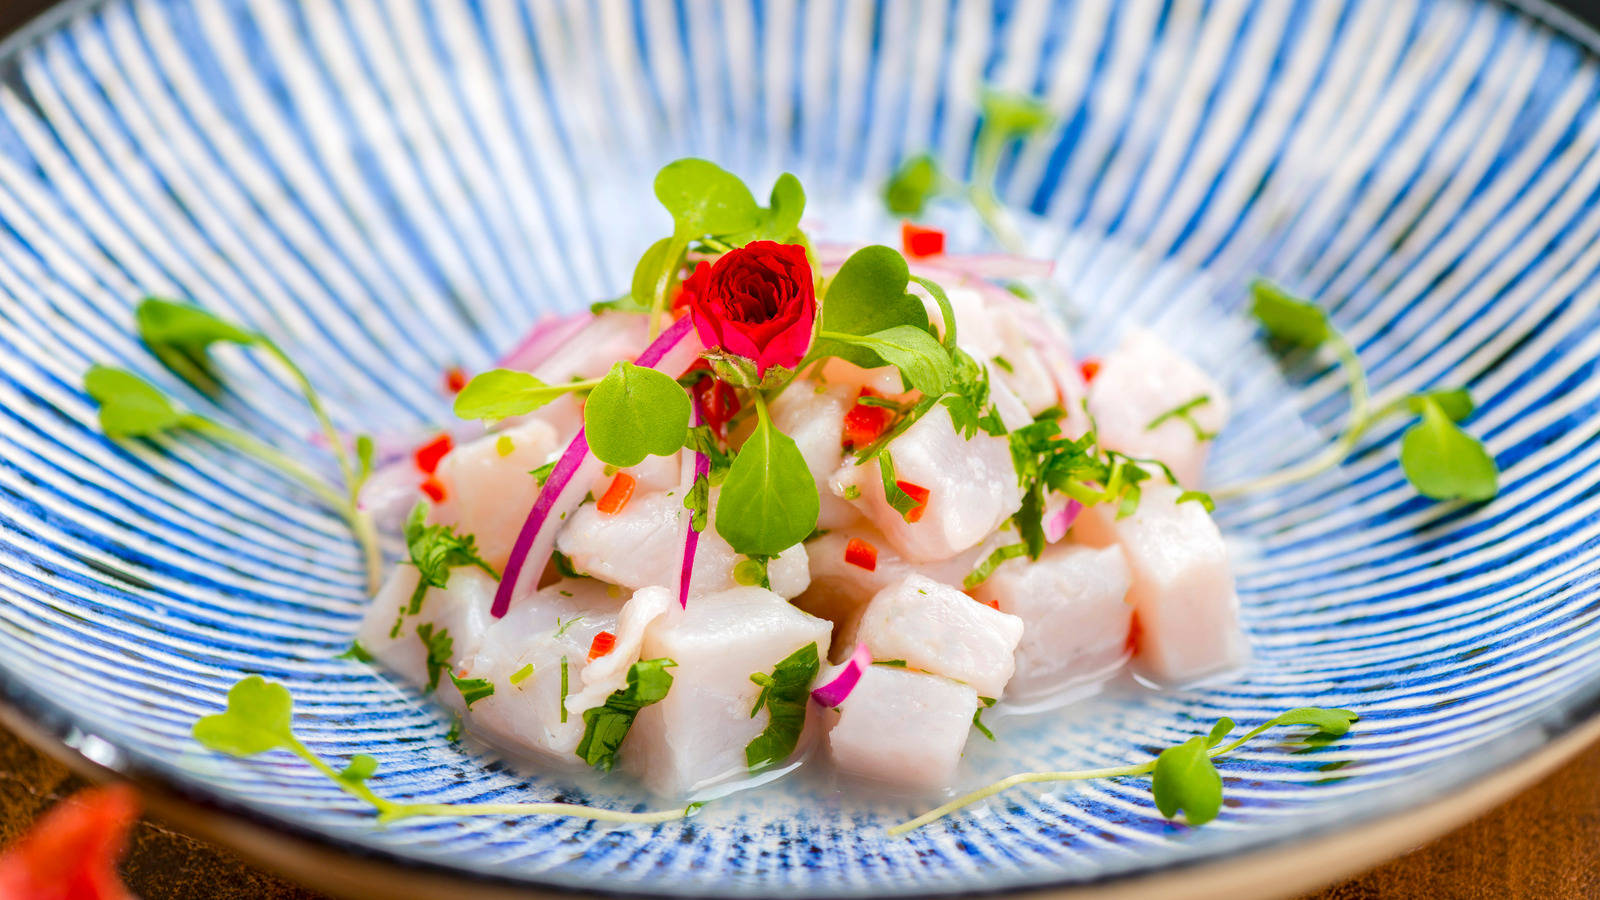 Small Serving Of Ceviche On Blue Bowl Wallpaper